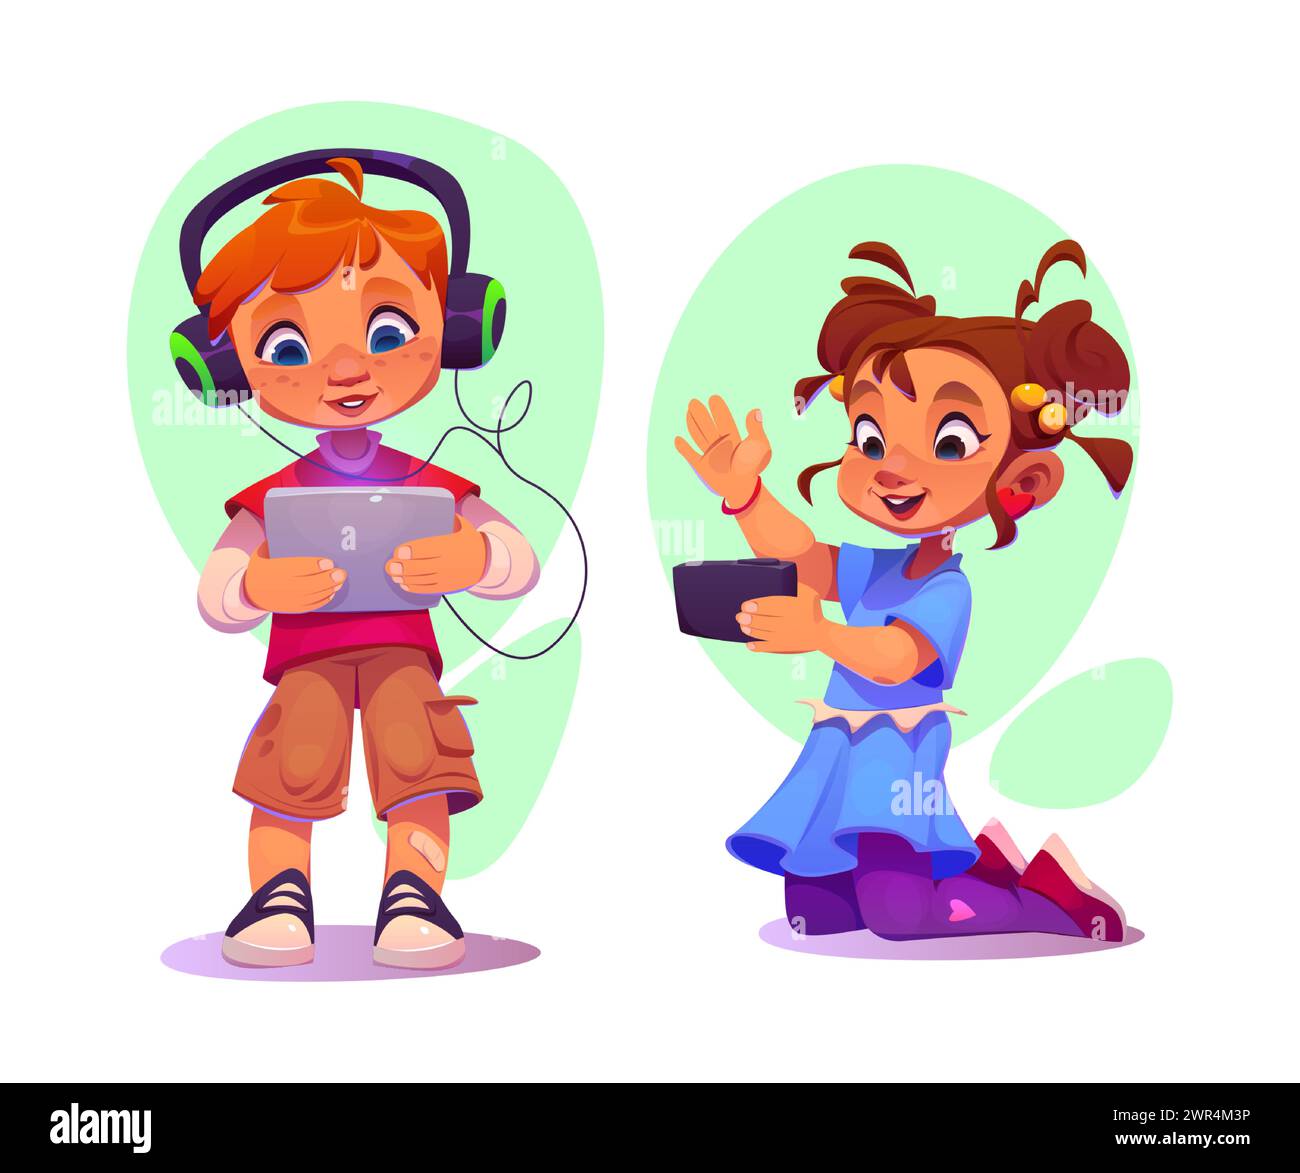 Kids using gadgets isolated on white background. Vector cartoon illustration of girl having video call on smartphone, boy in earphones playing game on tablet, smart technology for education and fun Stock Vector